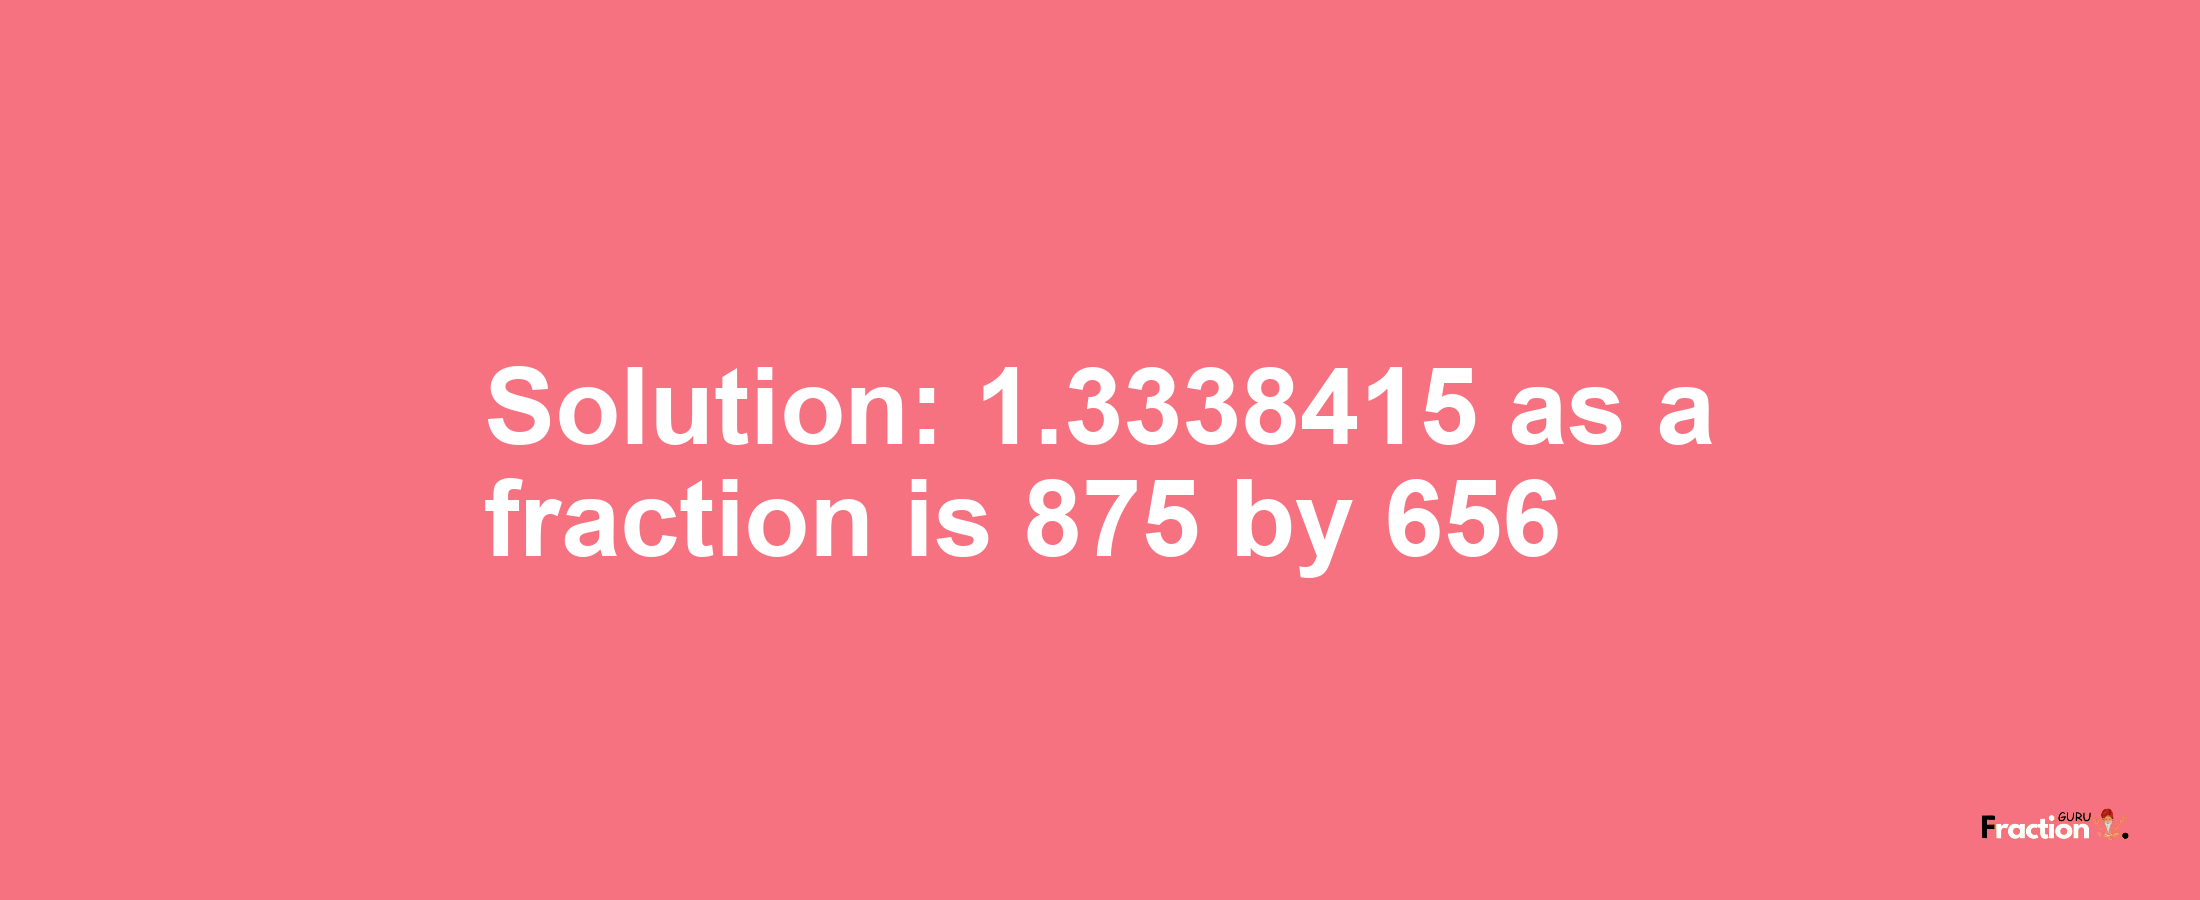 Solution:1.3338415 as a fraction is 875/656